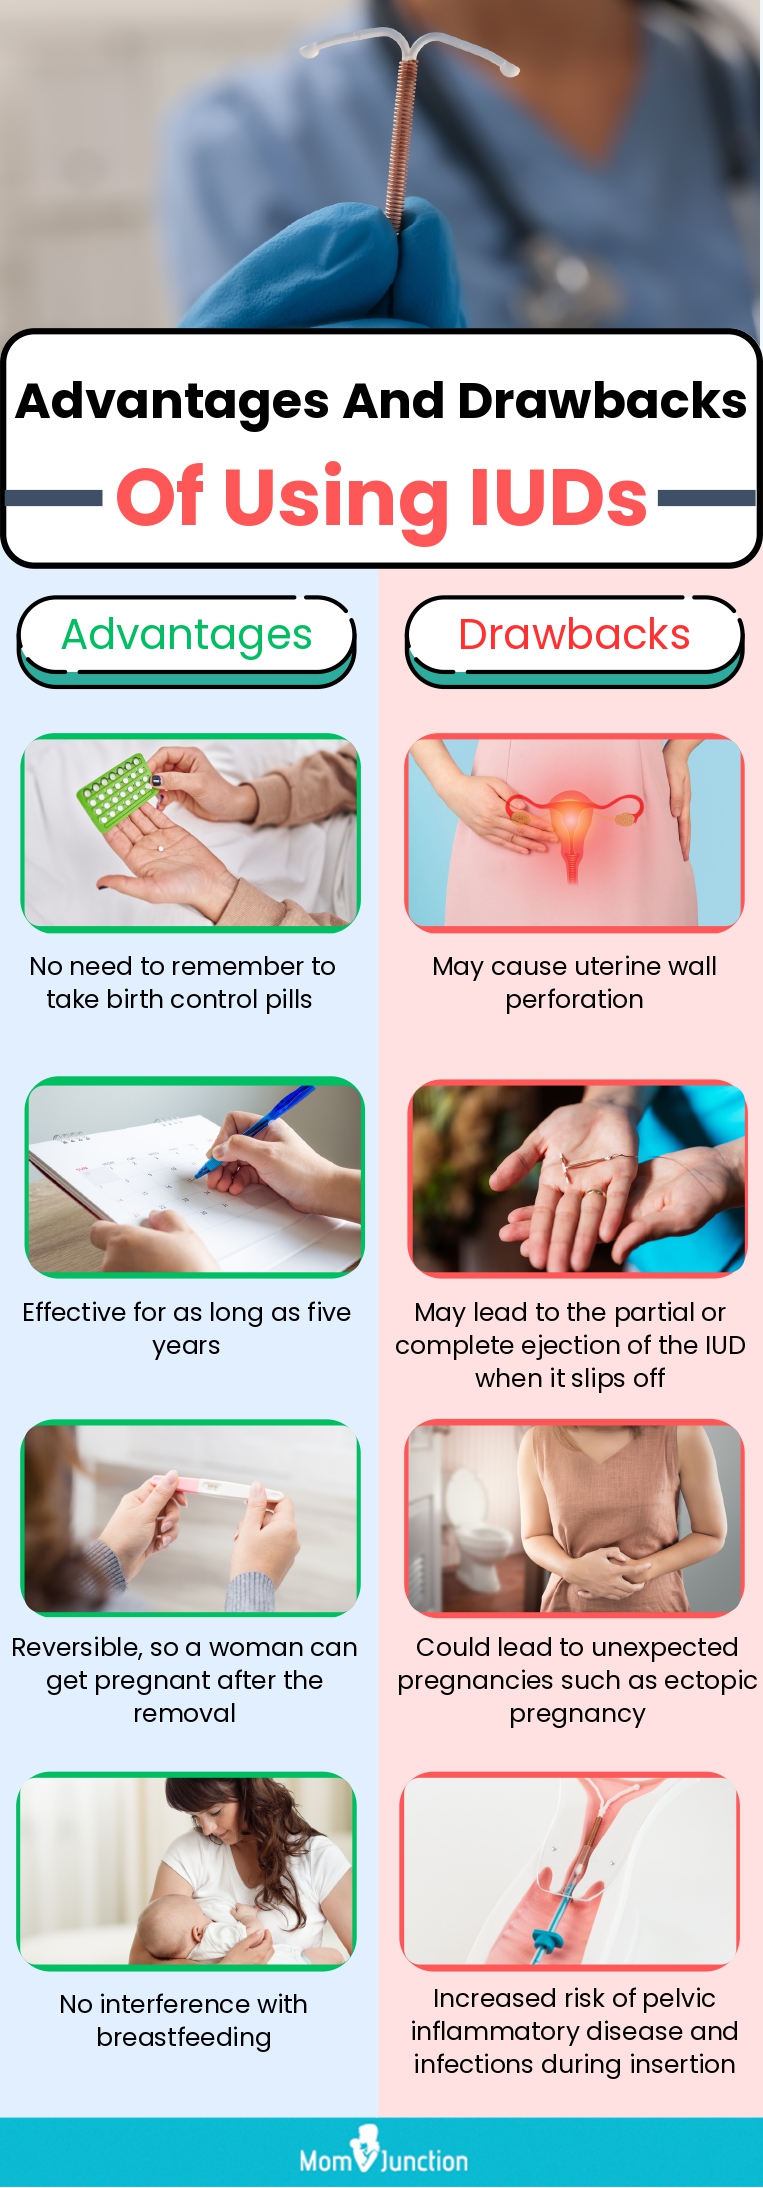 advantages and drawbacks of using iuds (infographic)